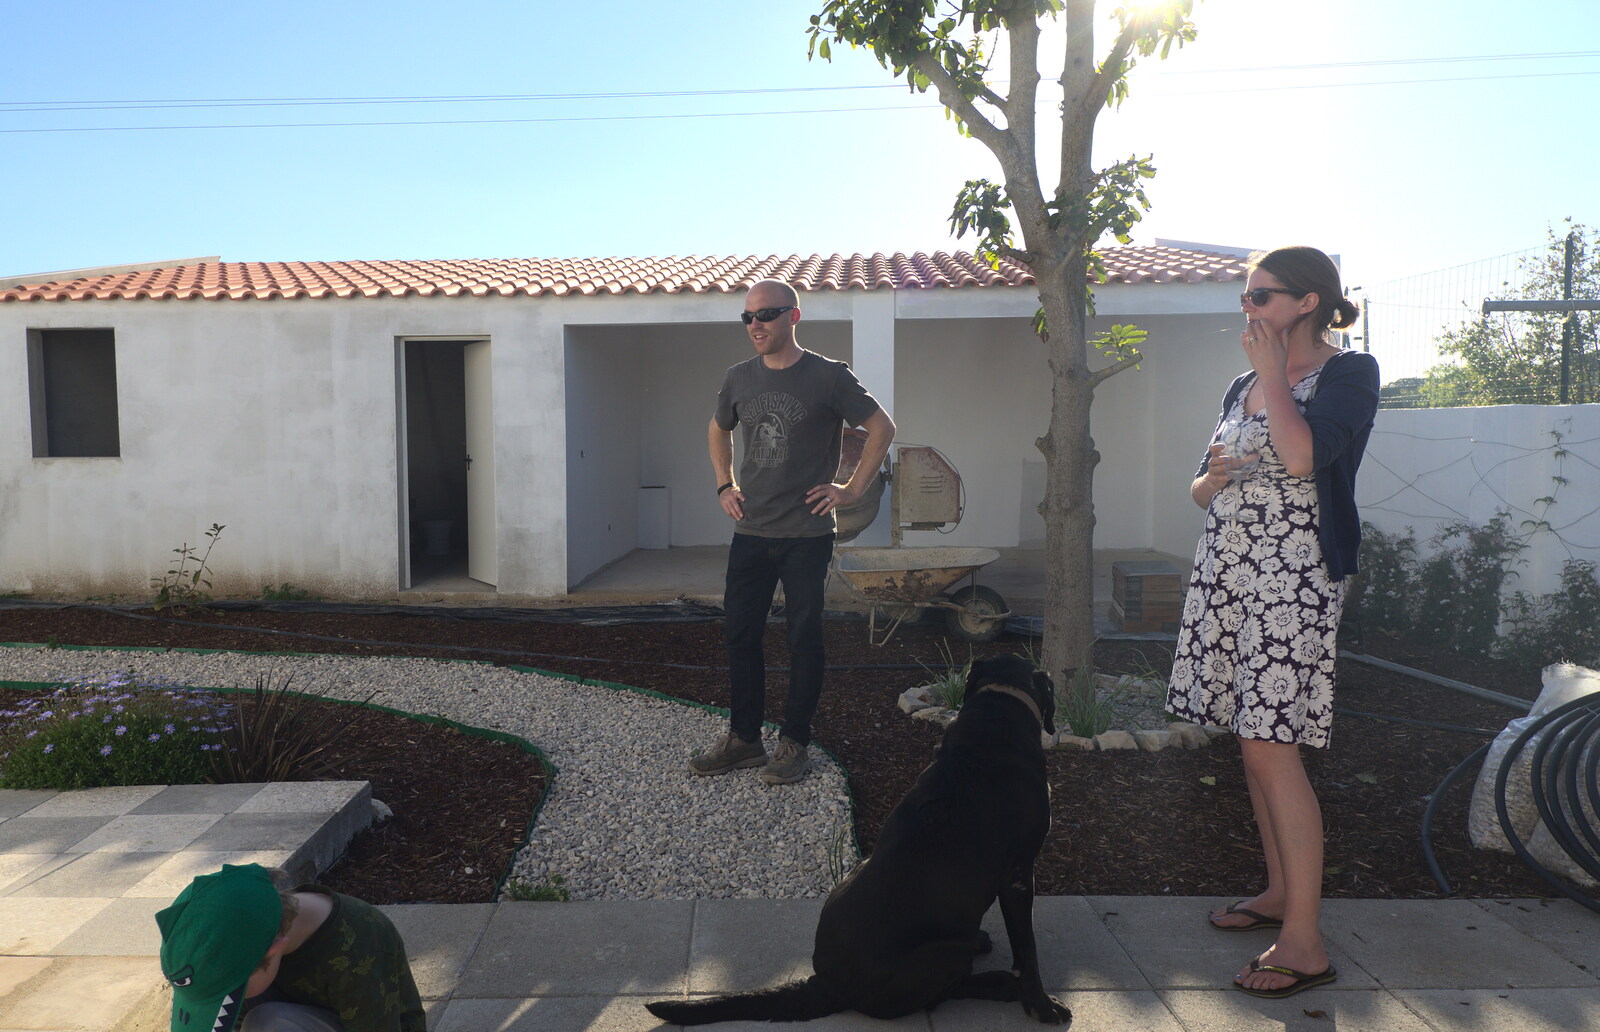 Gary and Isobel, with dog from Gary and Vanessa's Barbeque, Alcantarilha, Algarve, Portugal - 7th April 2016